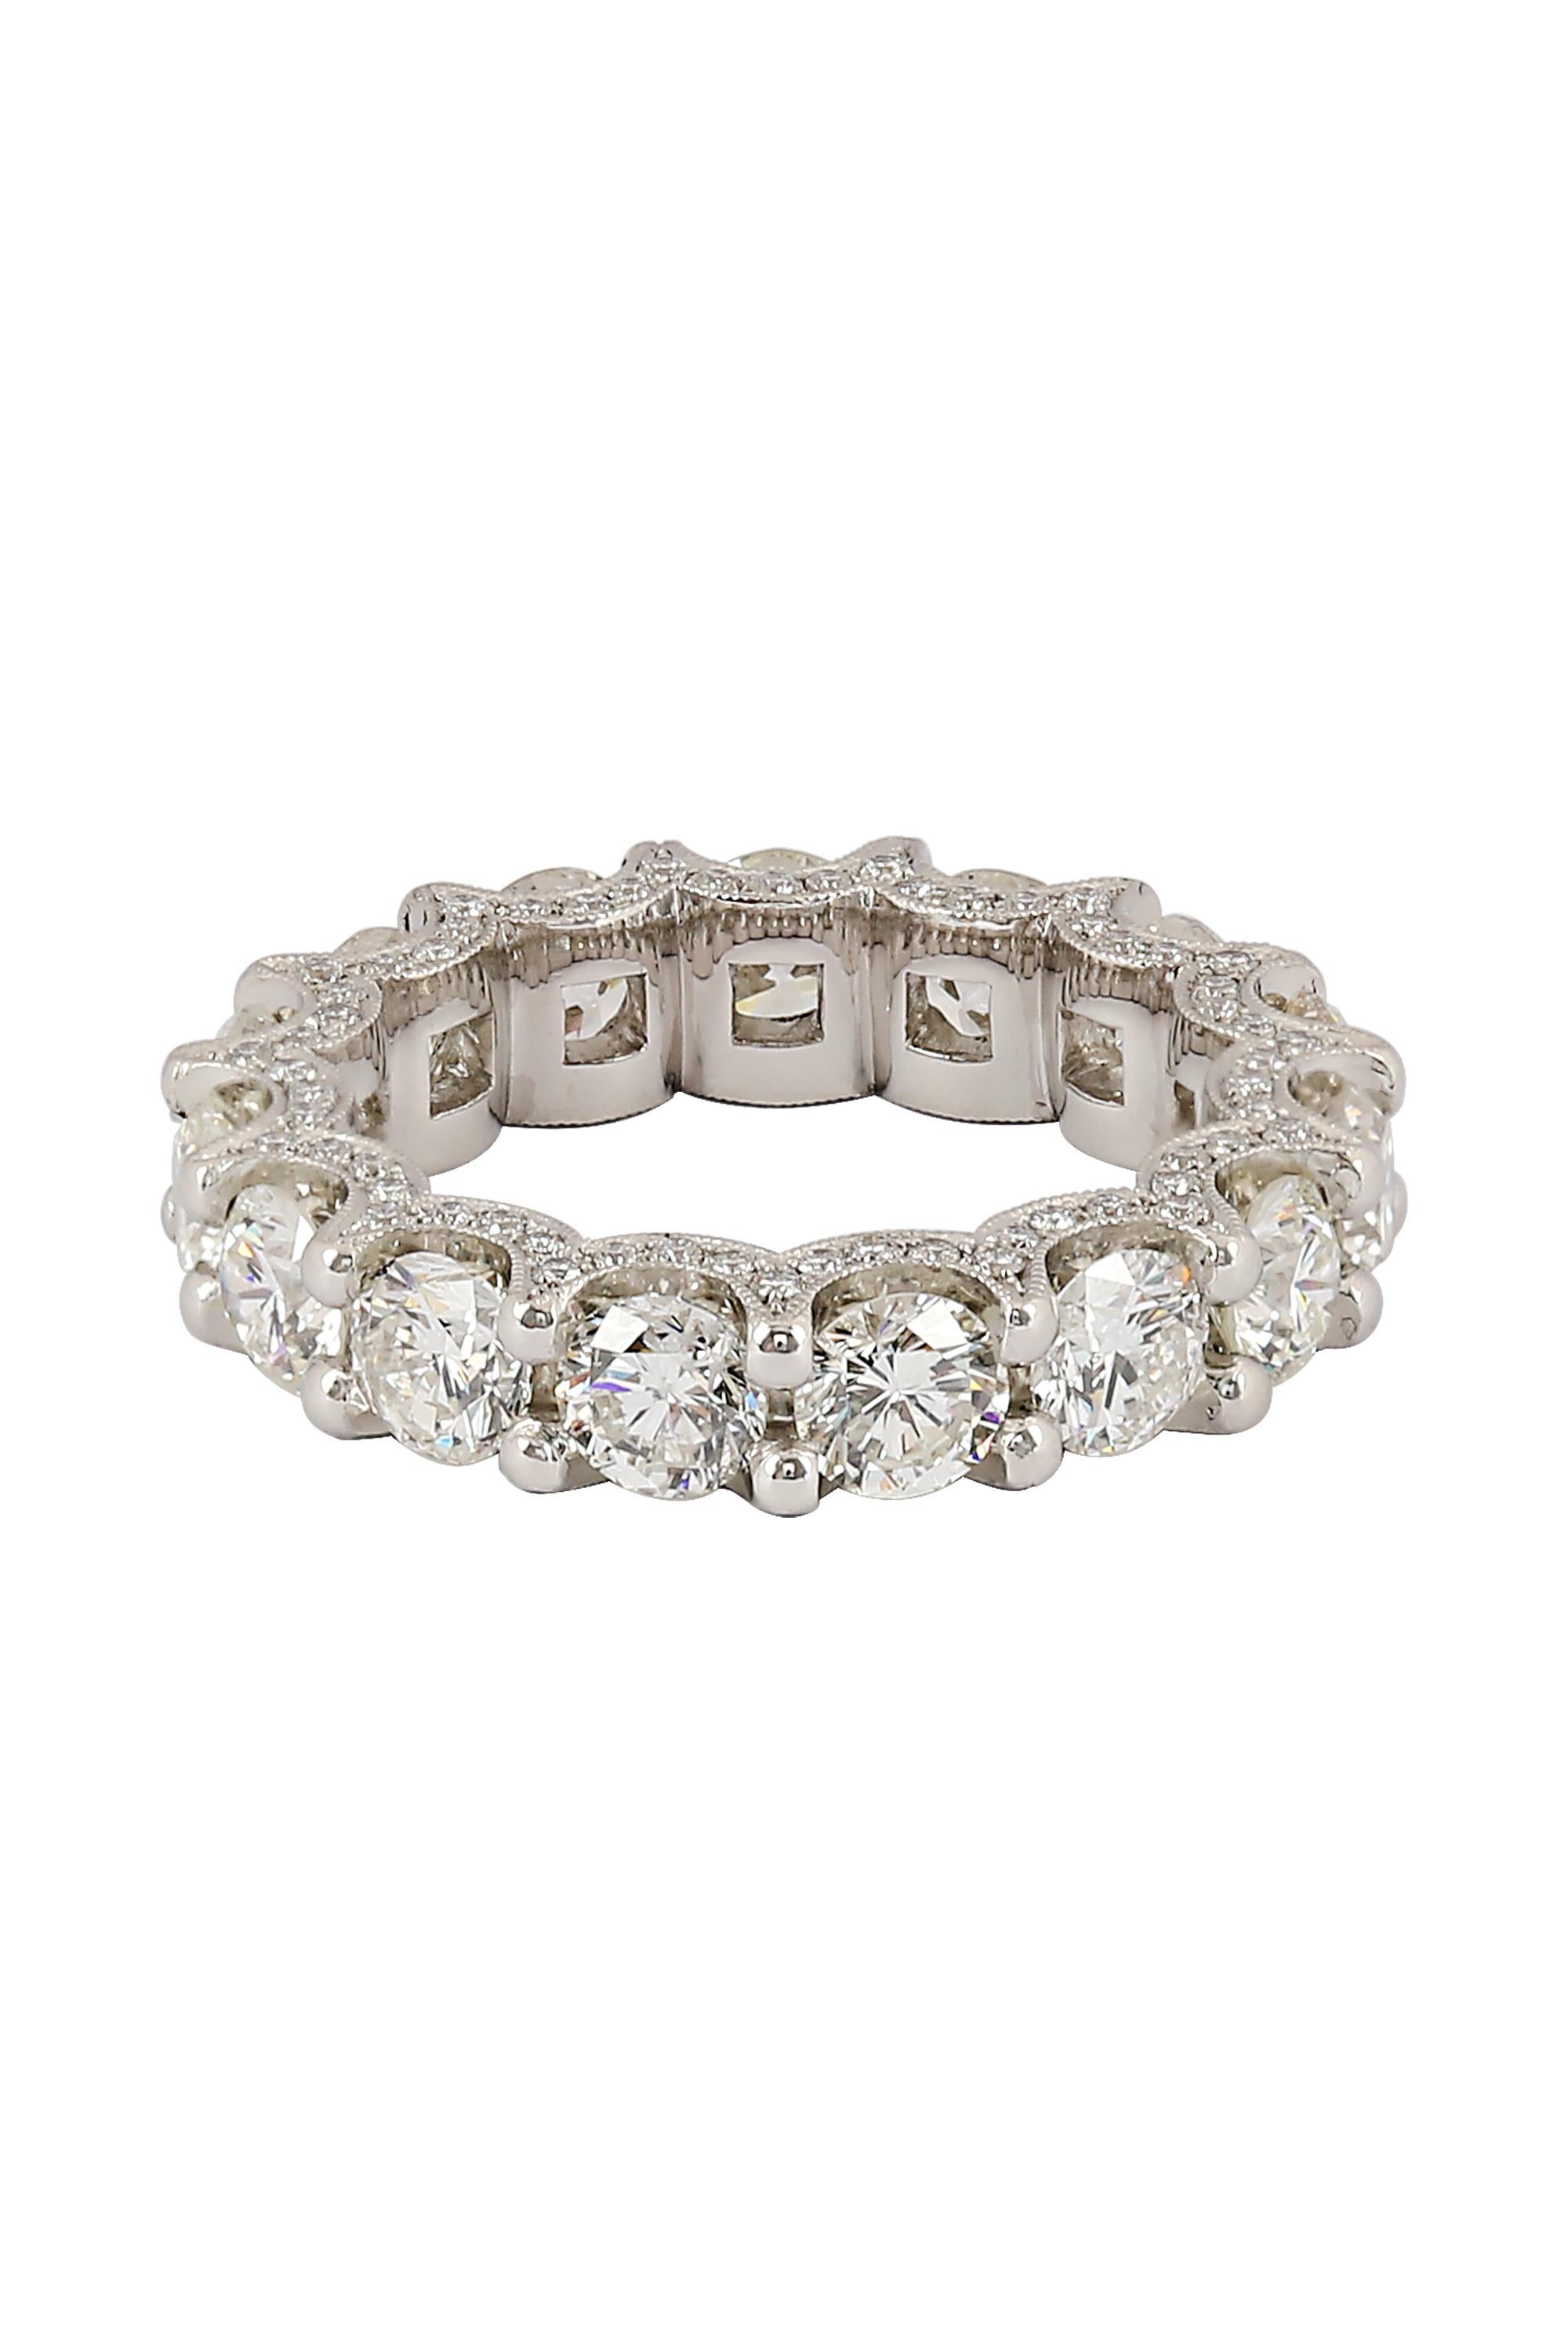 Round Cut Gems Are Forever 5.25 Carat Diamond and Platinum Eternity Band For Sale